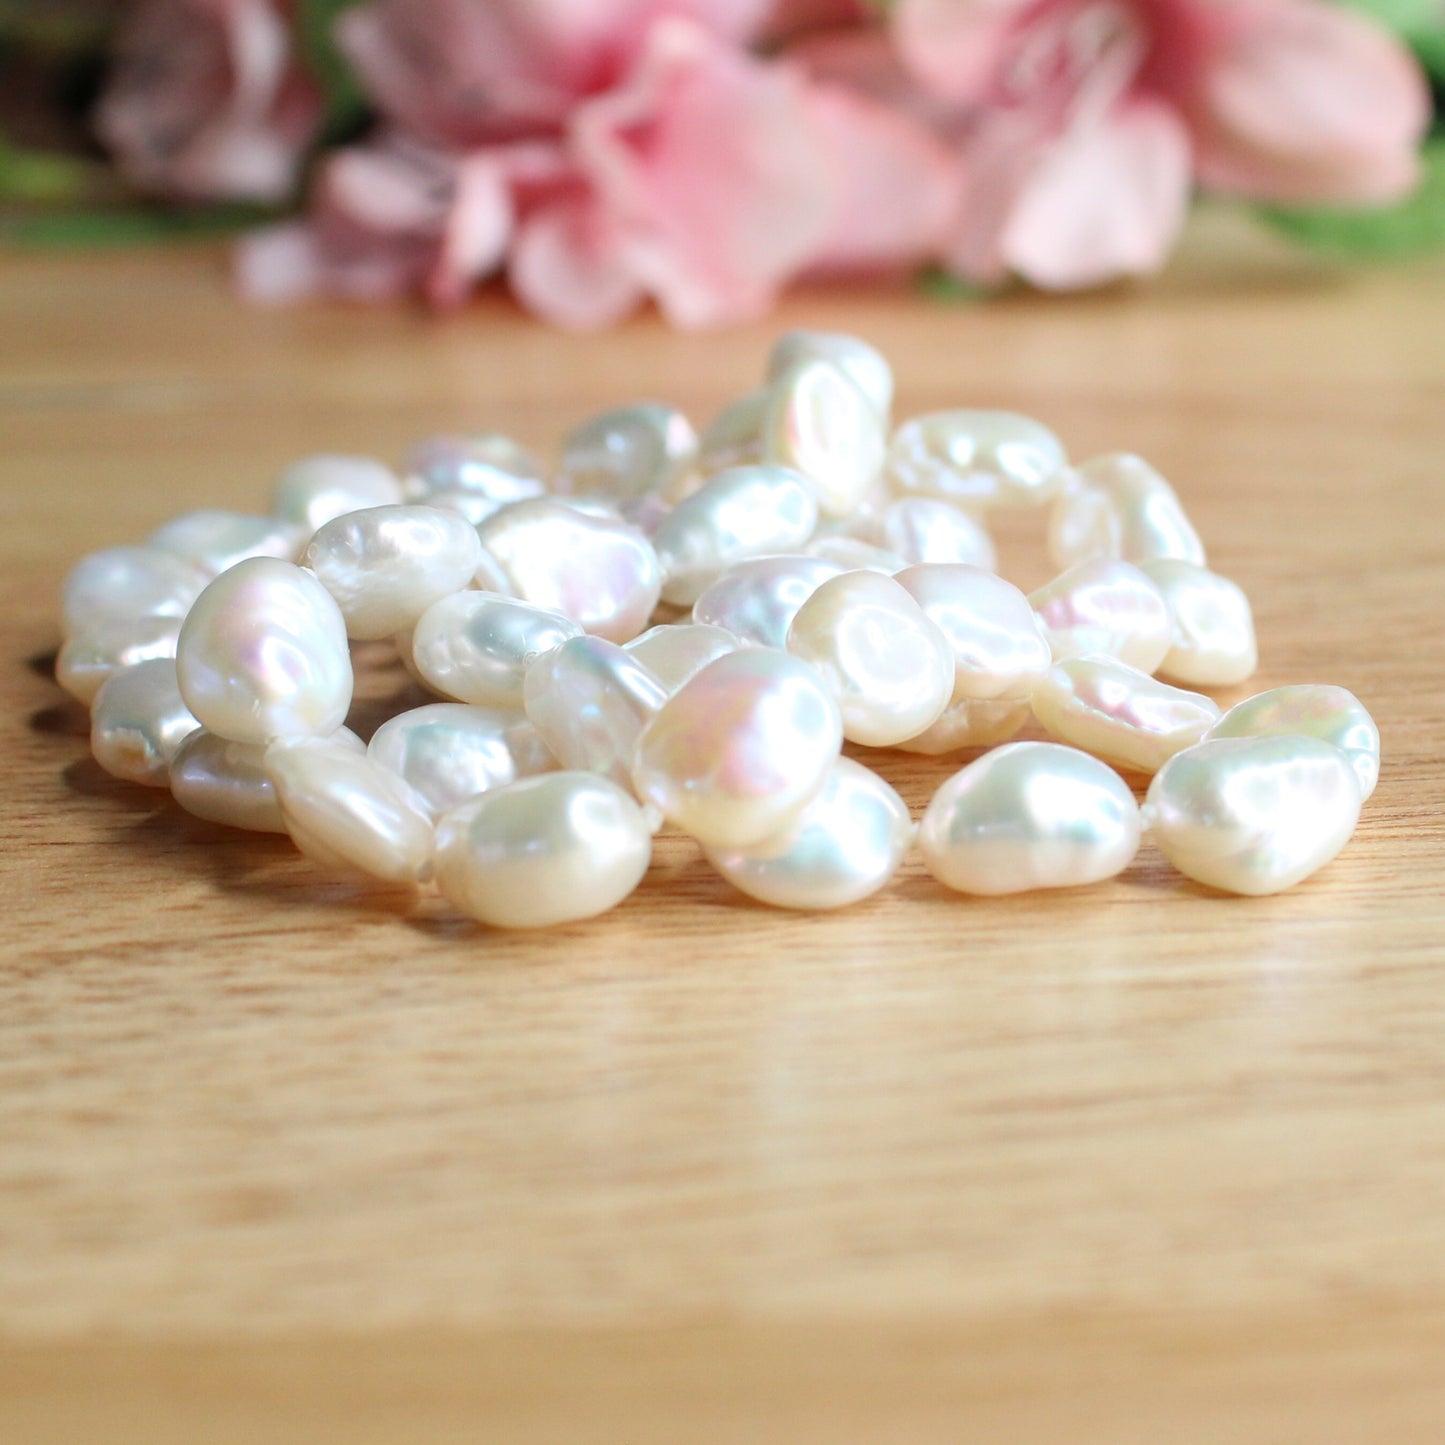 Baroque Pearl Necklace Hand knotted on Silk - Nora